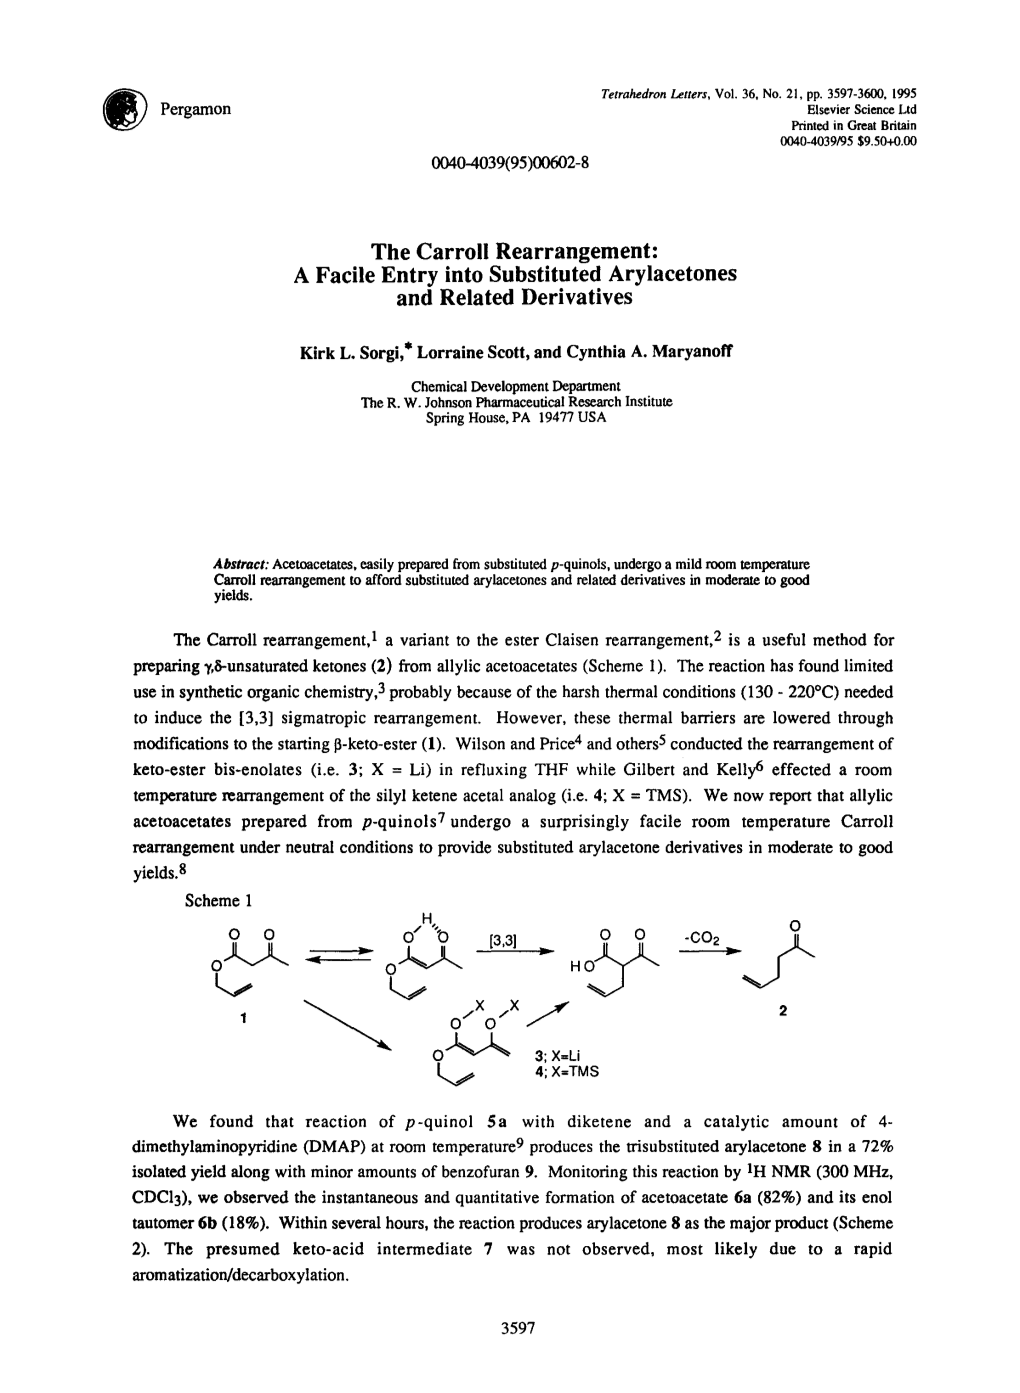 The Carroll Rearrangement: a Facile Entry Into Substituted Arylacetones and Related Derivatives